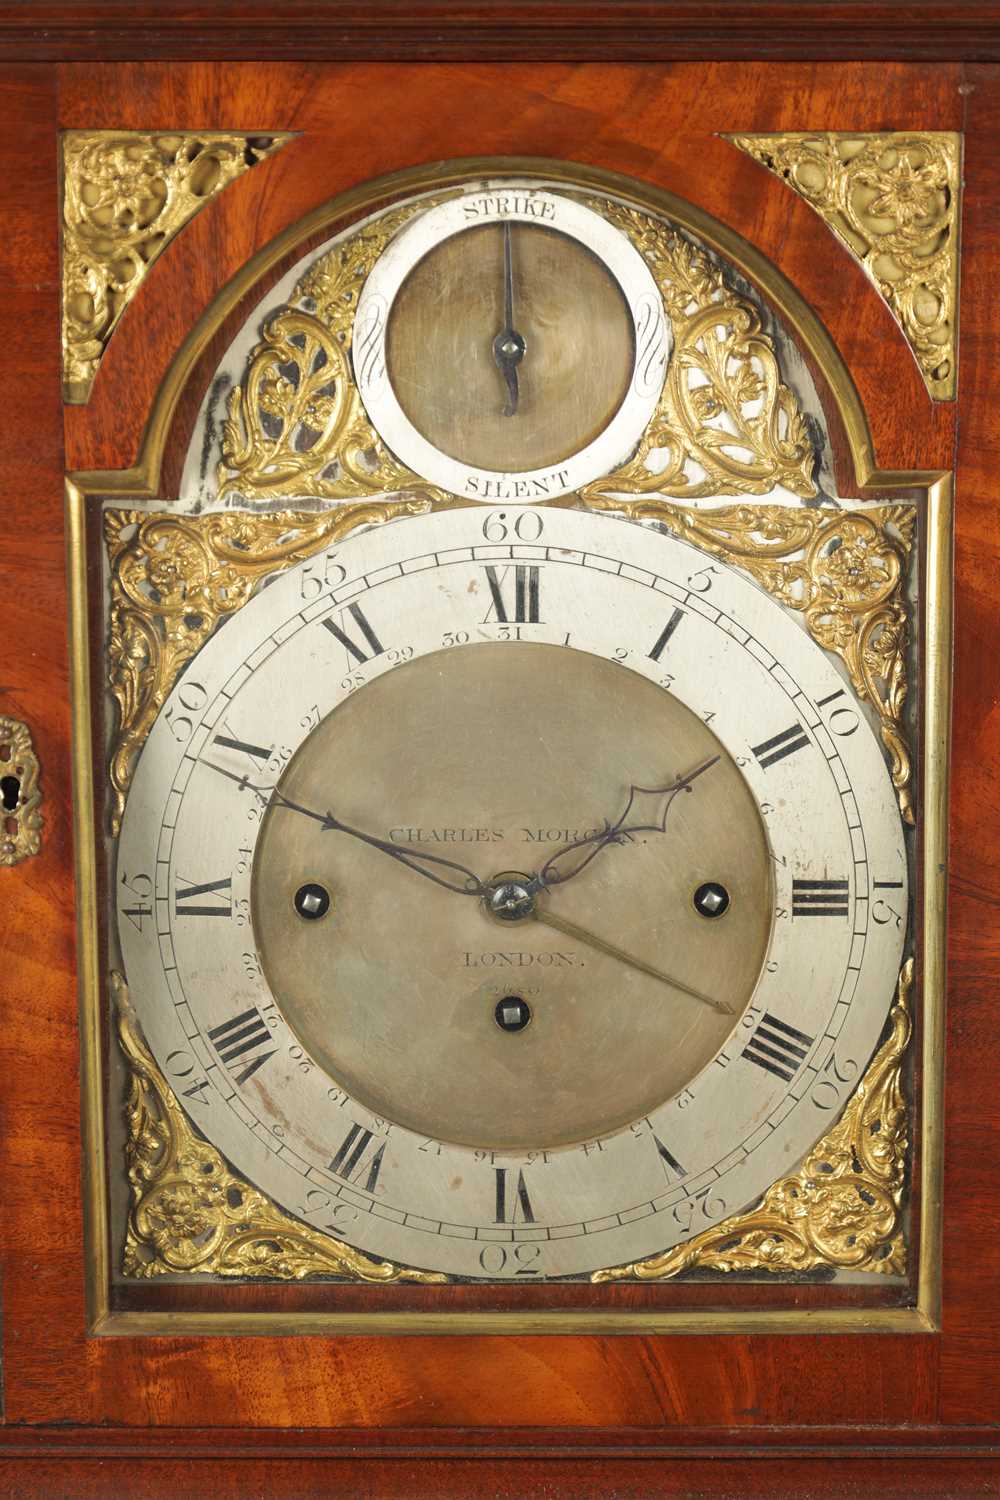 CHARLES MORGAN, LONDON. NO. 2680. A GEORGE III QUARTER CHIMING VERGE BRACKET CLOCK WITH CALENDAR AND - Image 3 of 14